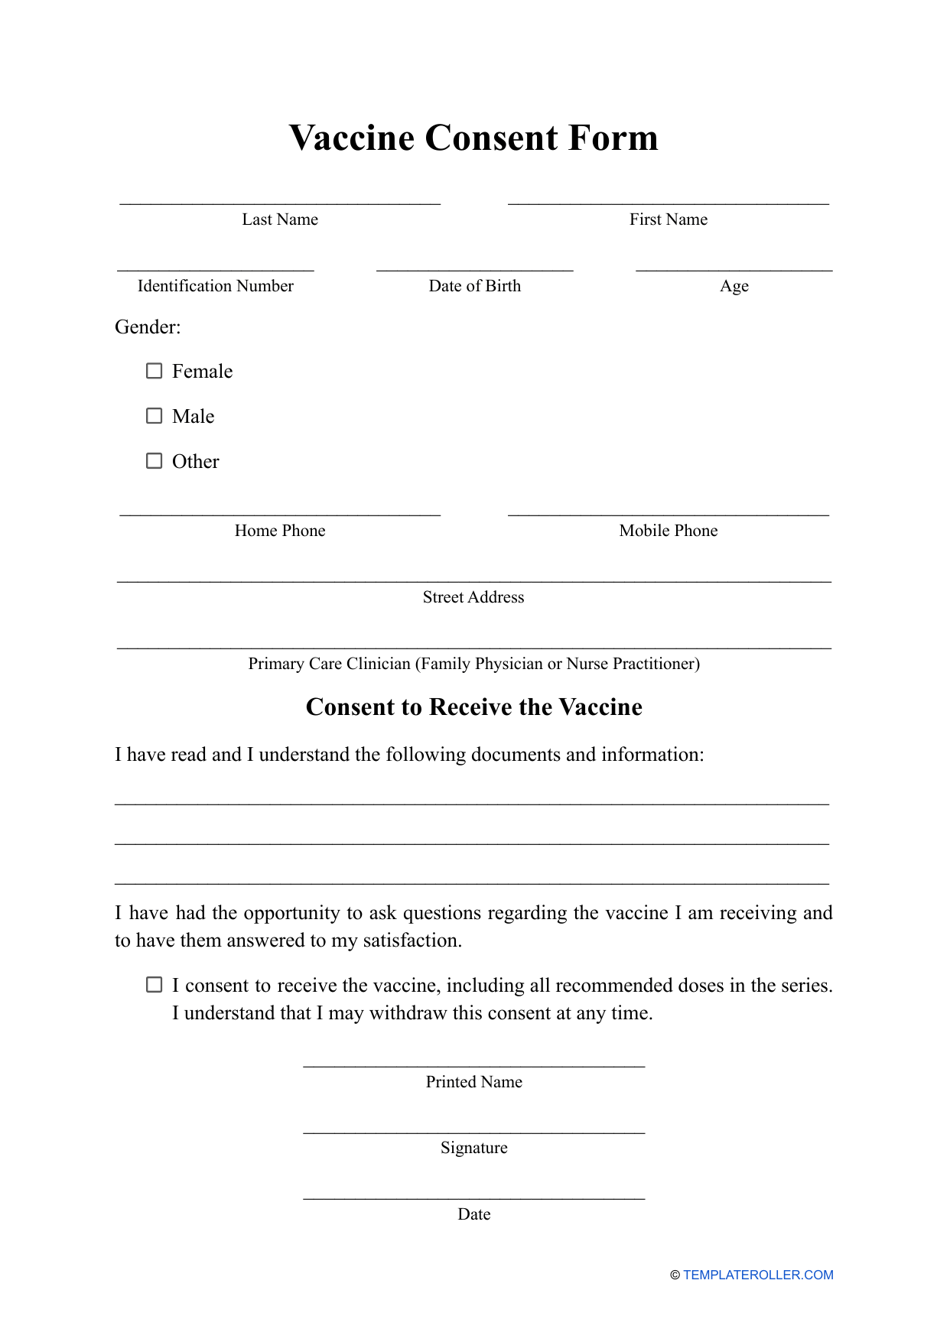 Vaccine Consent Form, Page 1